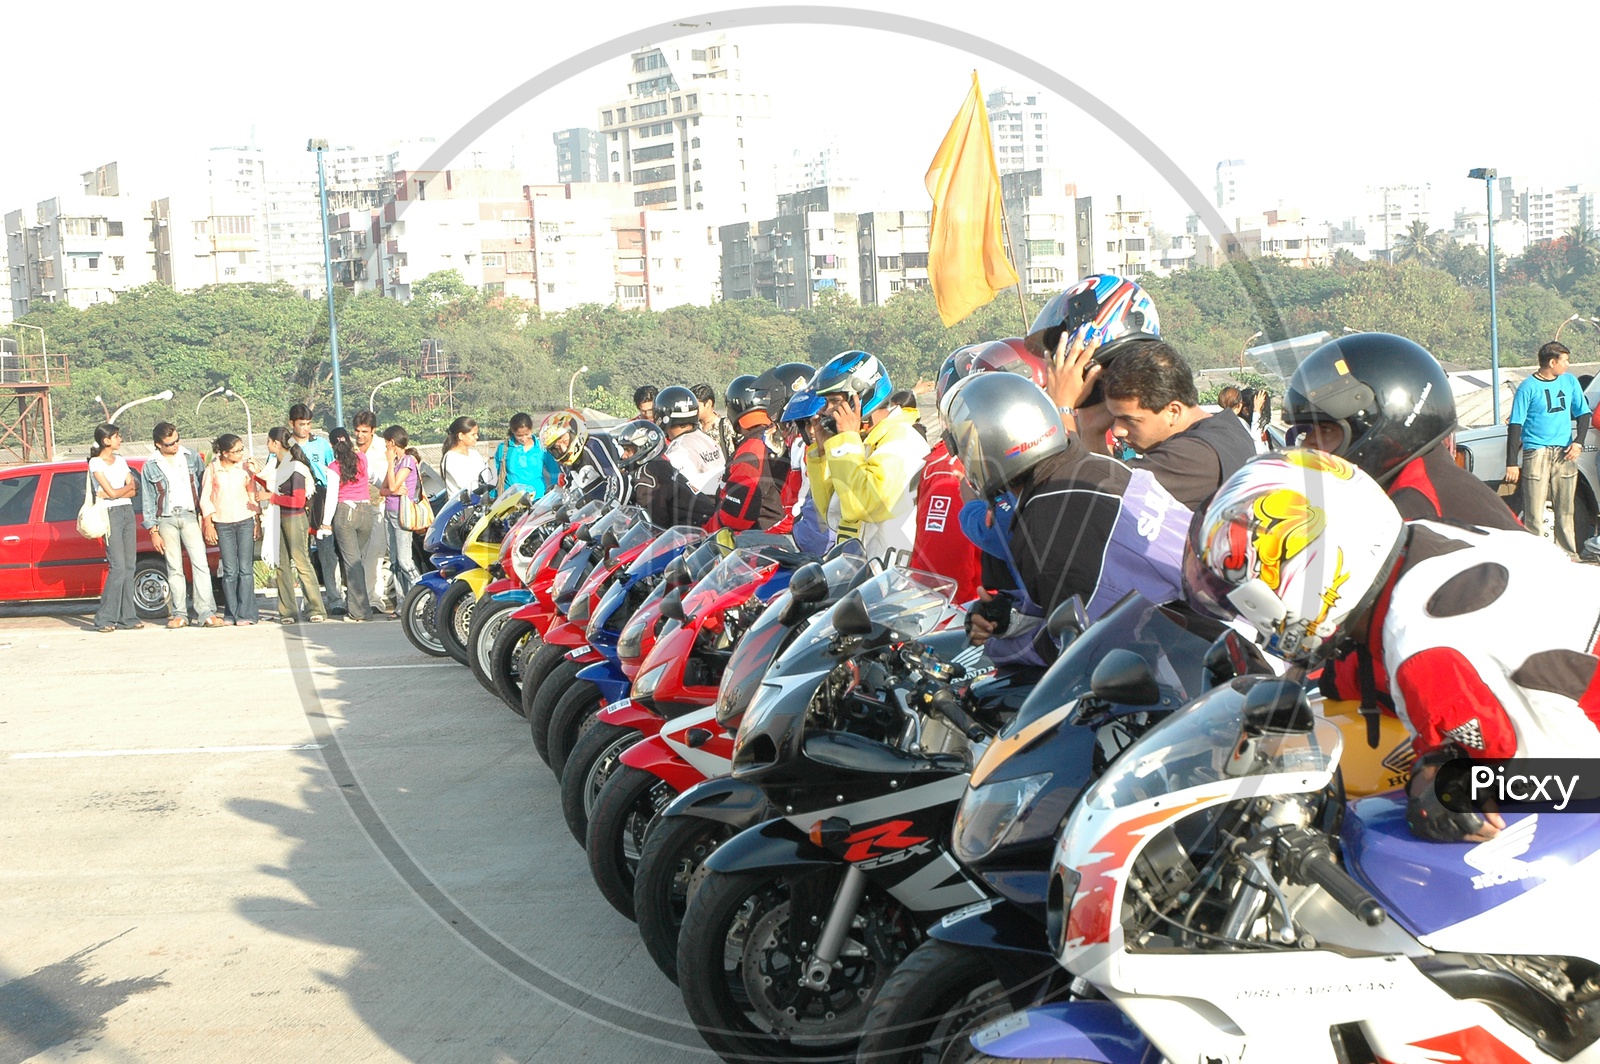 Bike Race Sequence Shot In Super movie With Trendy Bikes at  Race Course Mumbai